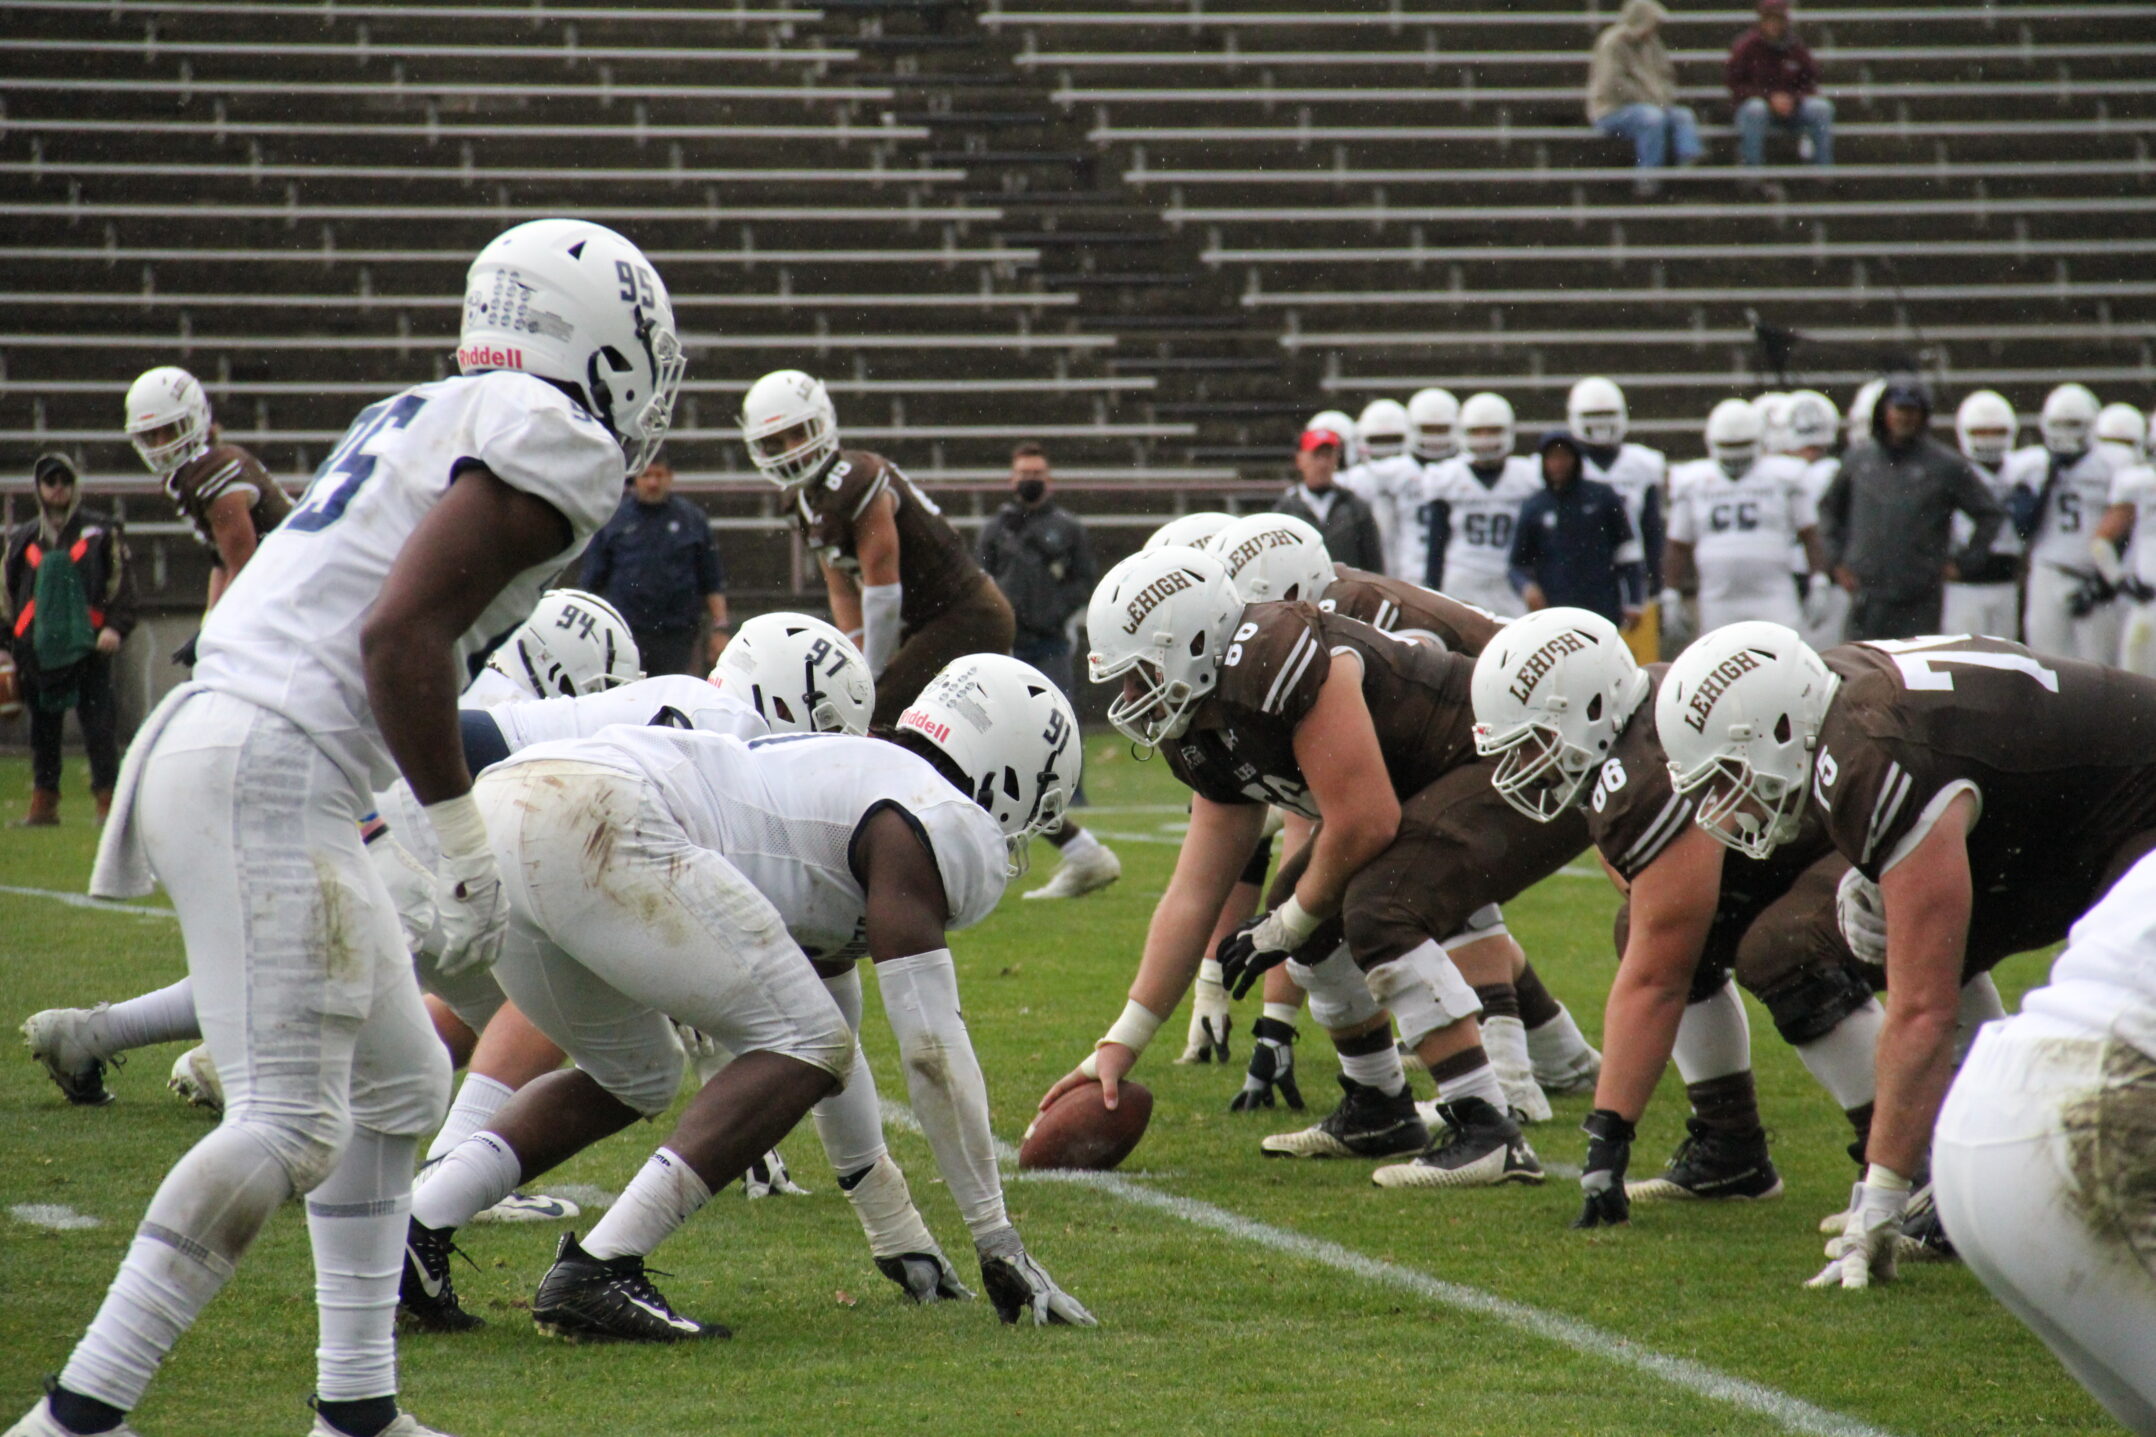 Lehigh football secures win against The Brown and White